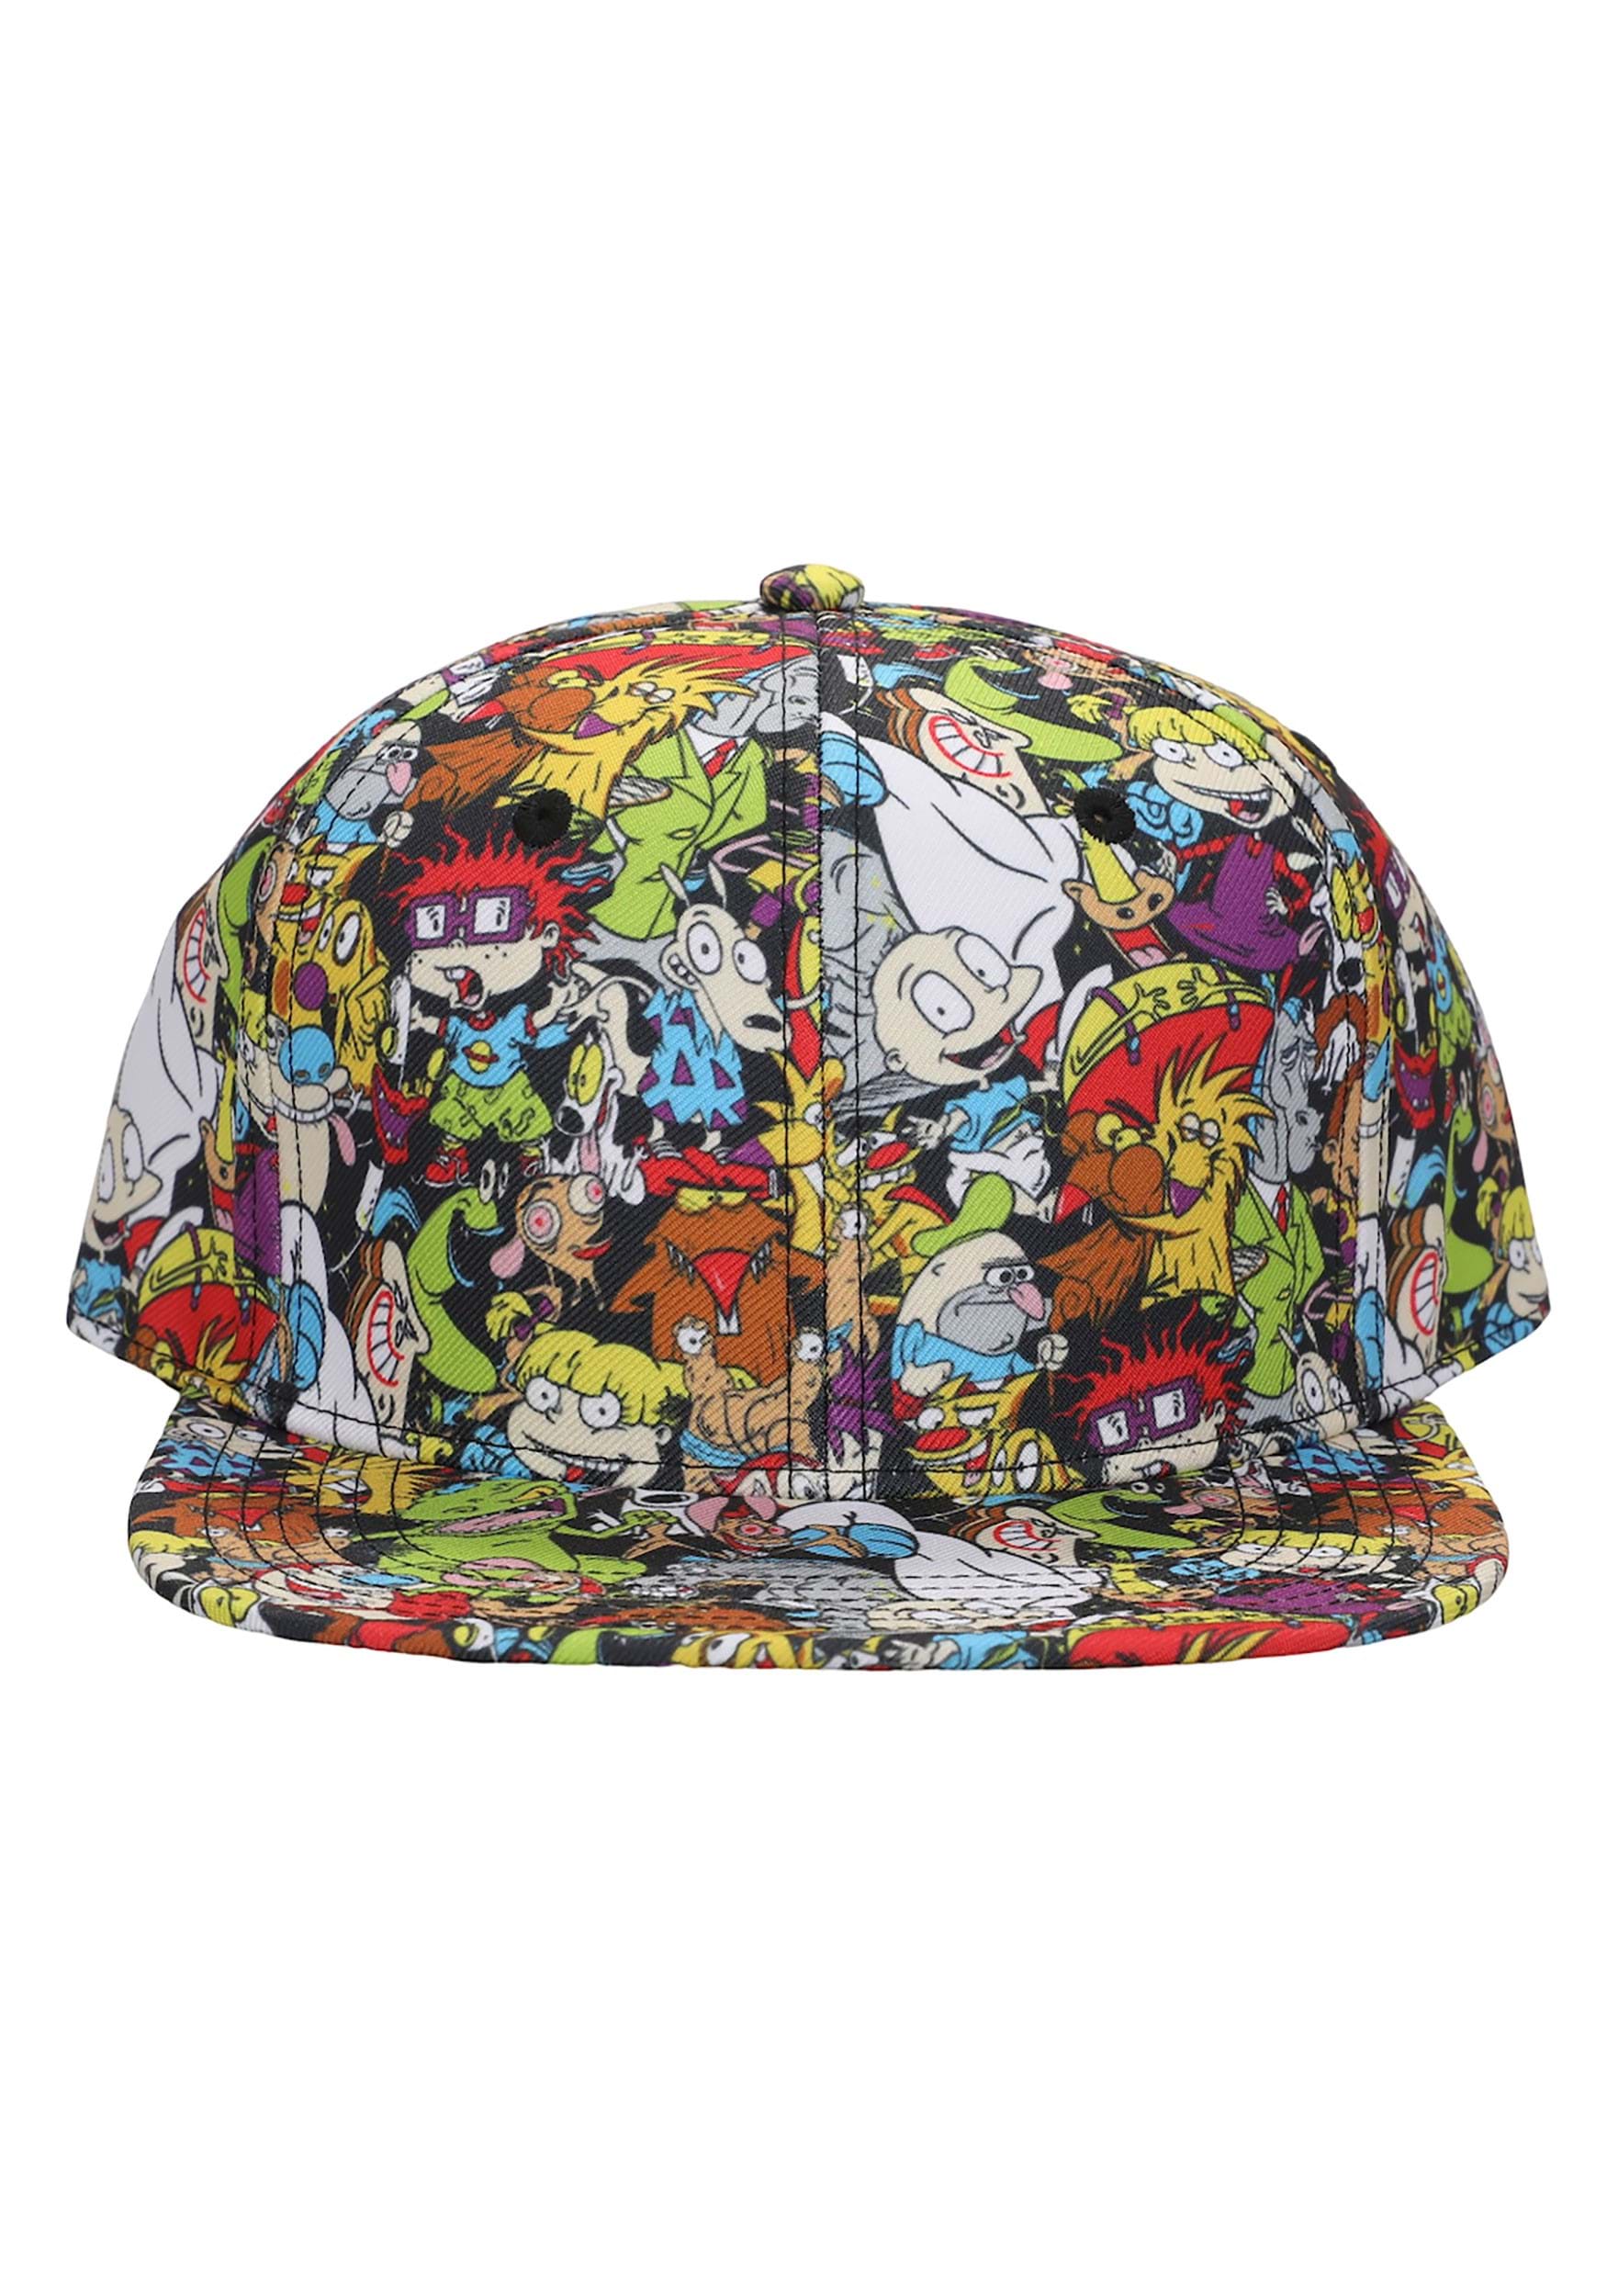 Nick 90s Multi Character Hat for Adults